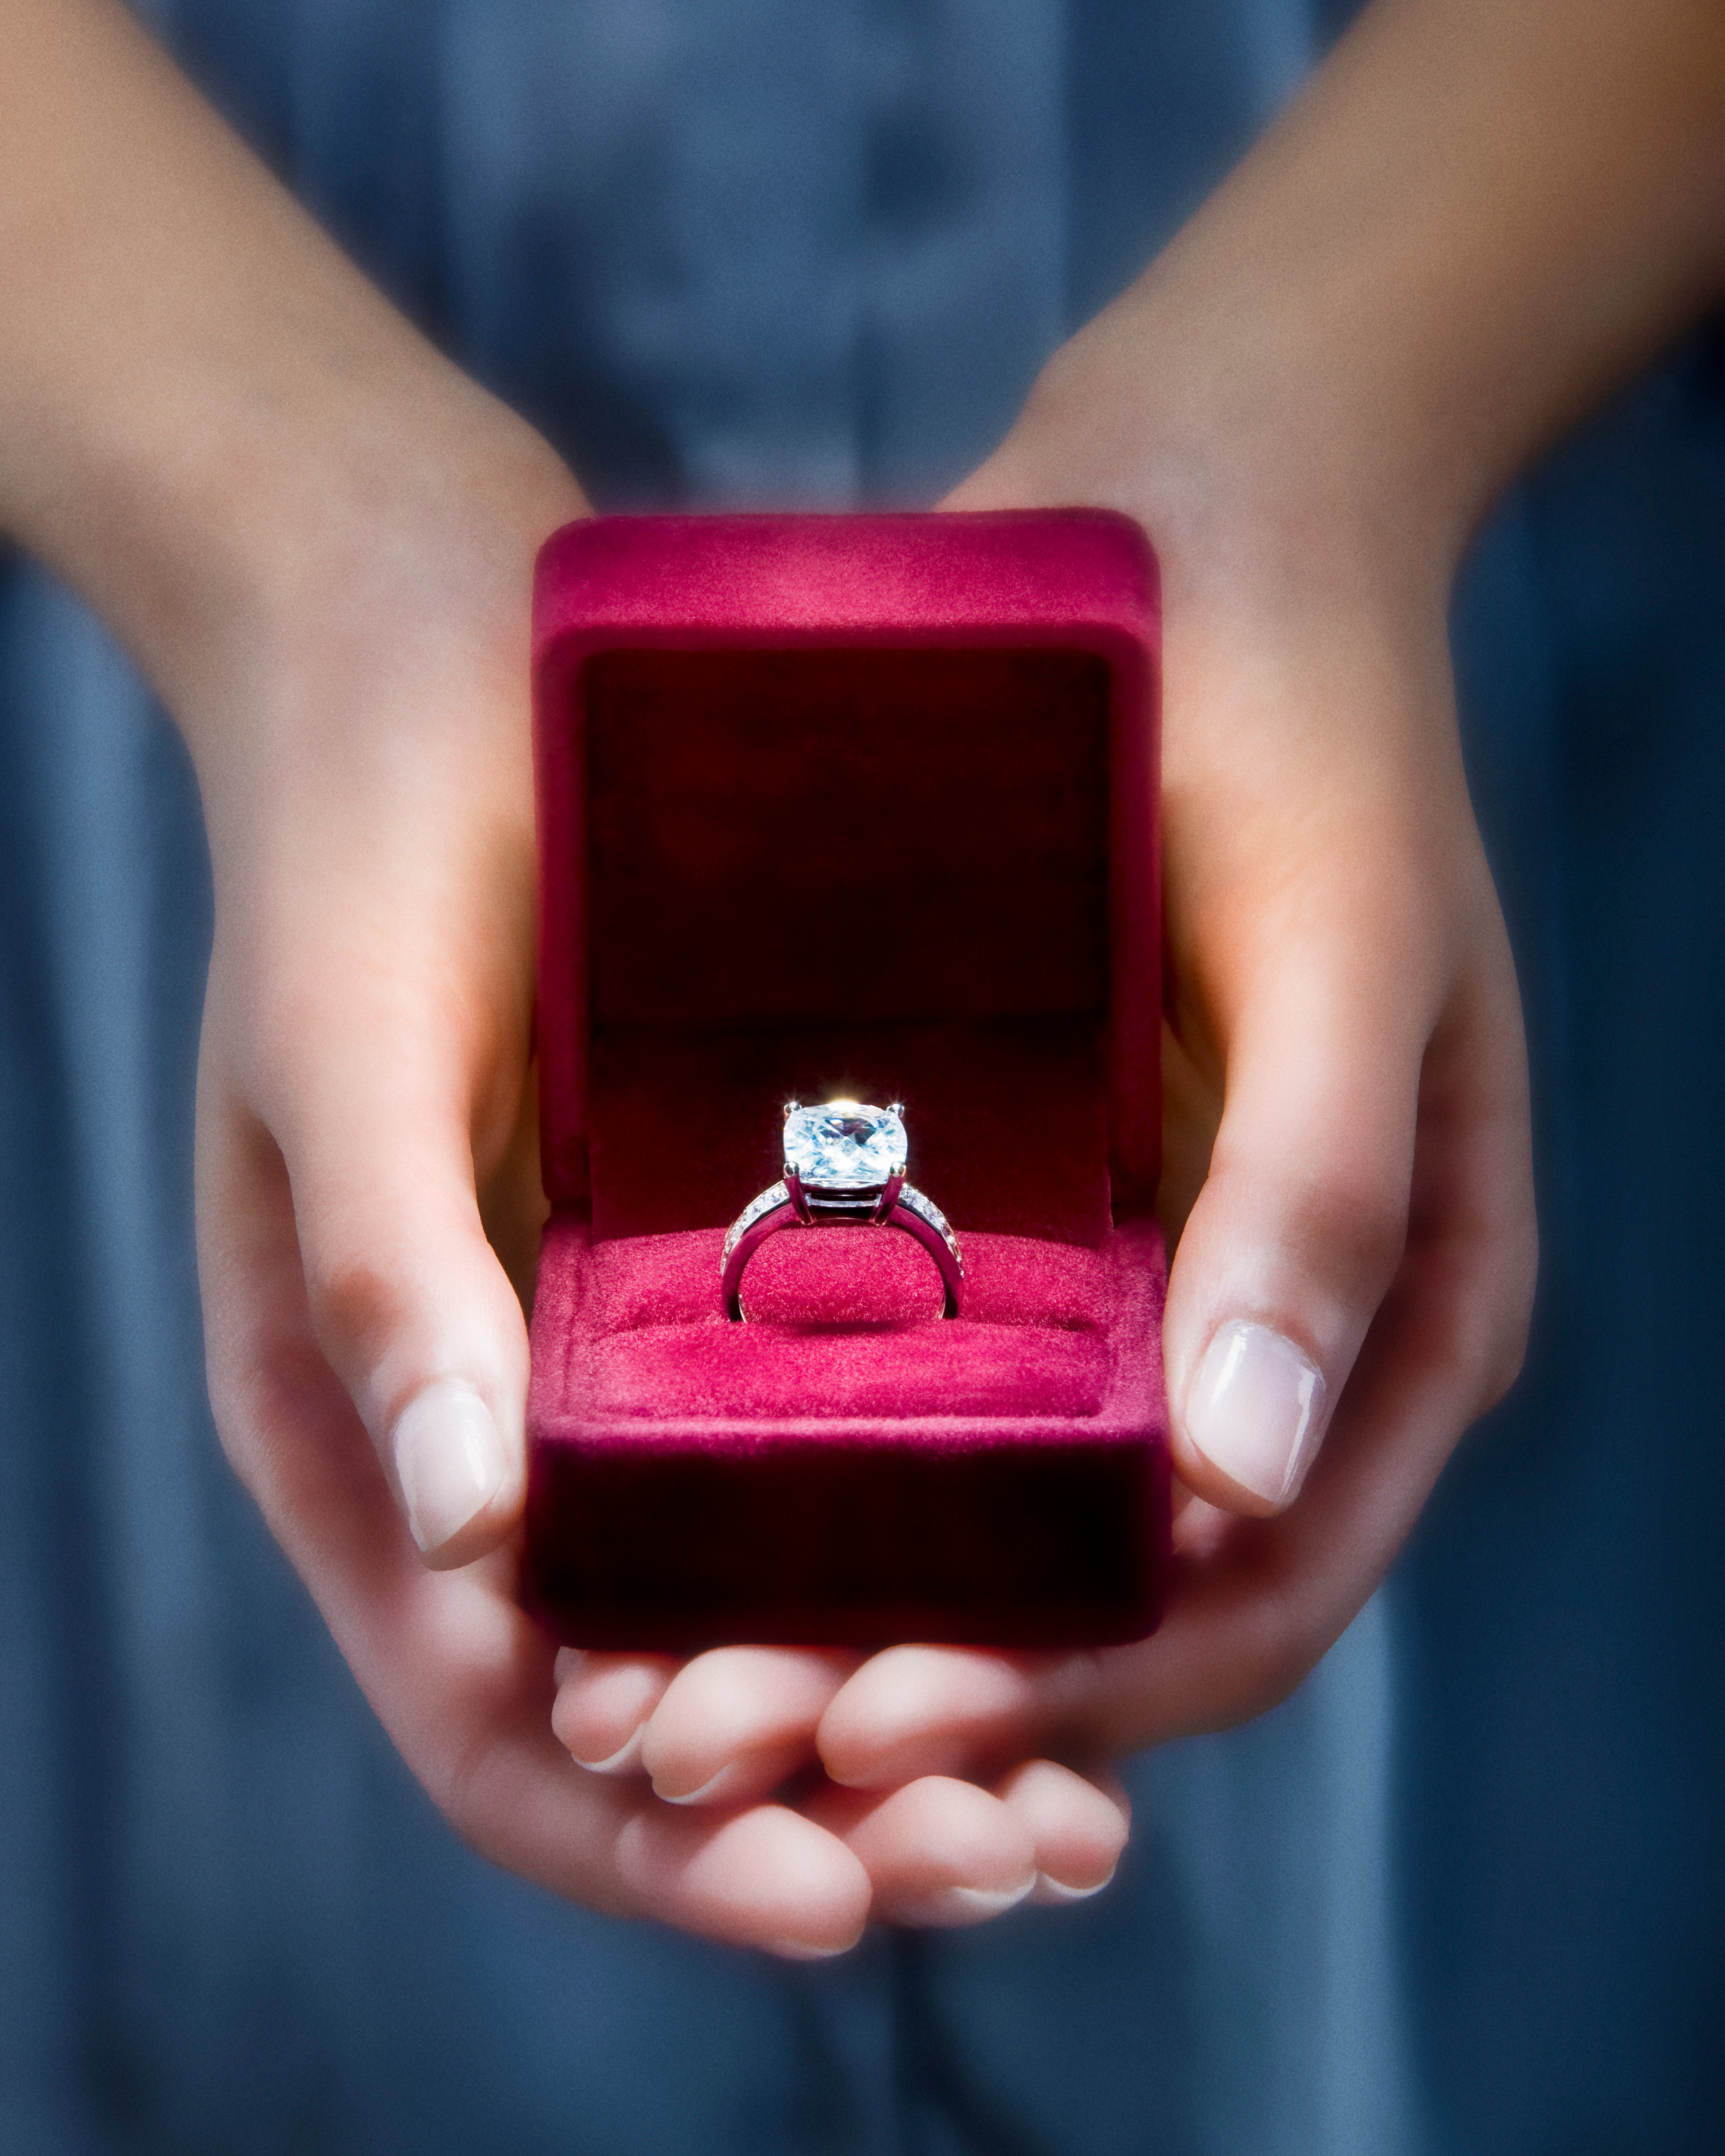 You Don't Have to Wait For What You Want! 3 Ways To Propose To Him This Holiday Season